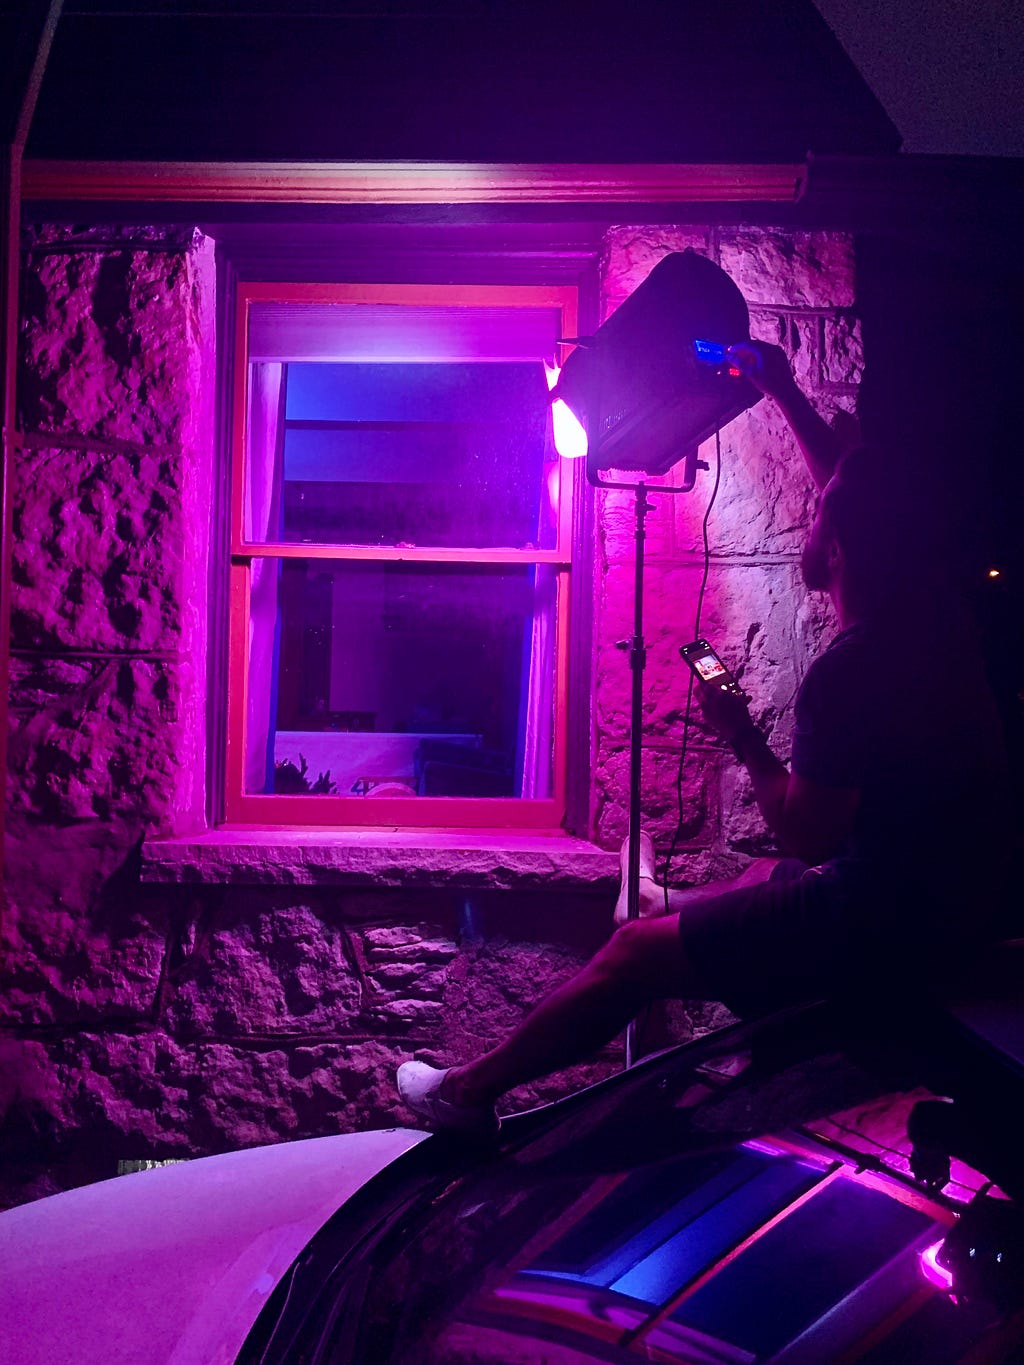 Refe sits on the roof of a car and shines a powerful pink light through the window of a house in the middle of the night.